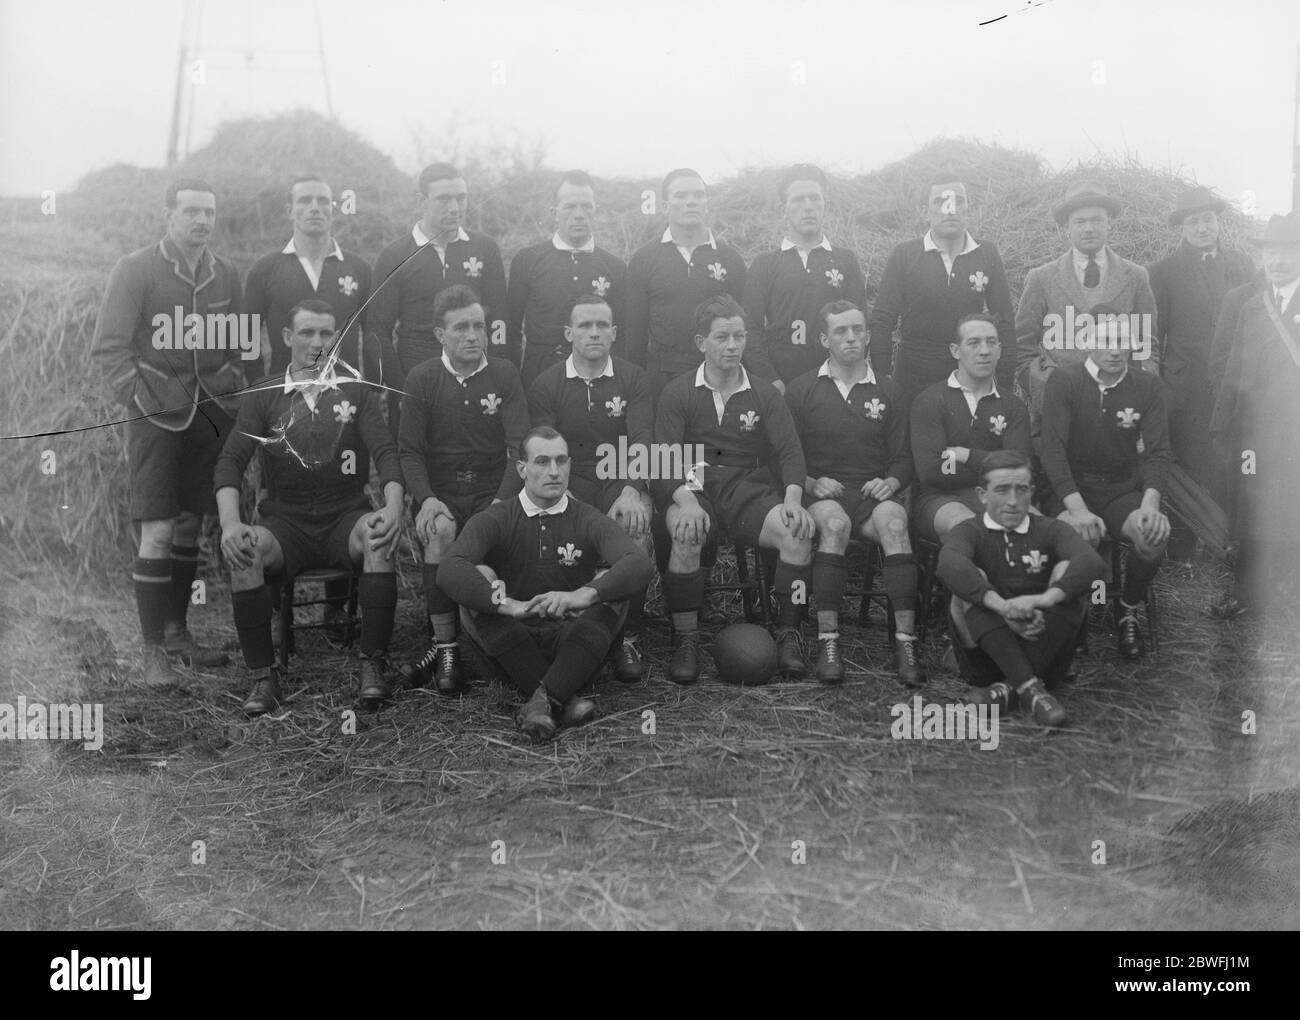 Rugby International at Twickenham . England versus Wales . The Welsh team : Back row , left to right : T Parker , S Morris , G Michael , A Baker , Gethin Thomas , D G Davies , Capt A S Burge . Middle row , left to right : T Roberts , J Rees , R A Cornish , Clem Lewis ( Capt ) , T Johnson , A Jenkins , R Harding . Front row , left to right : J Thompson , W J Delahay . 20 January 1923 Stock Photo